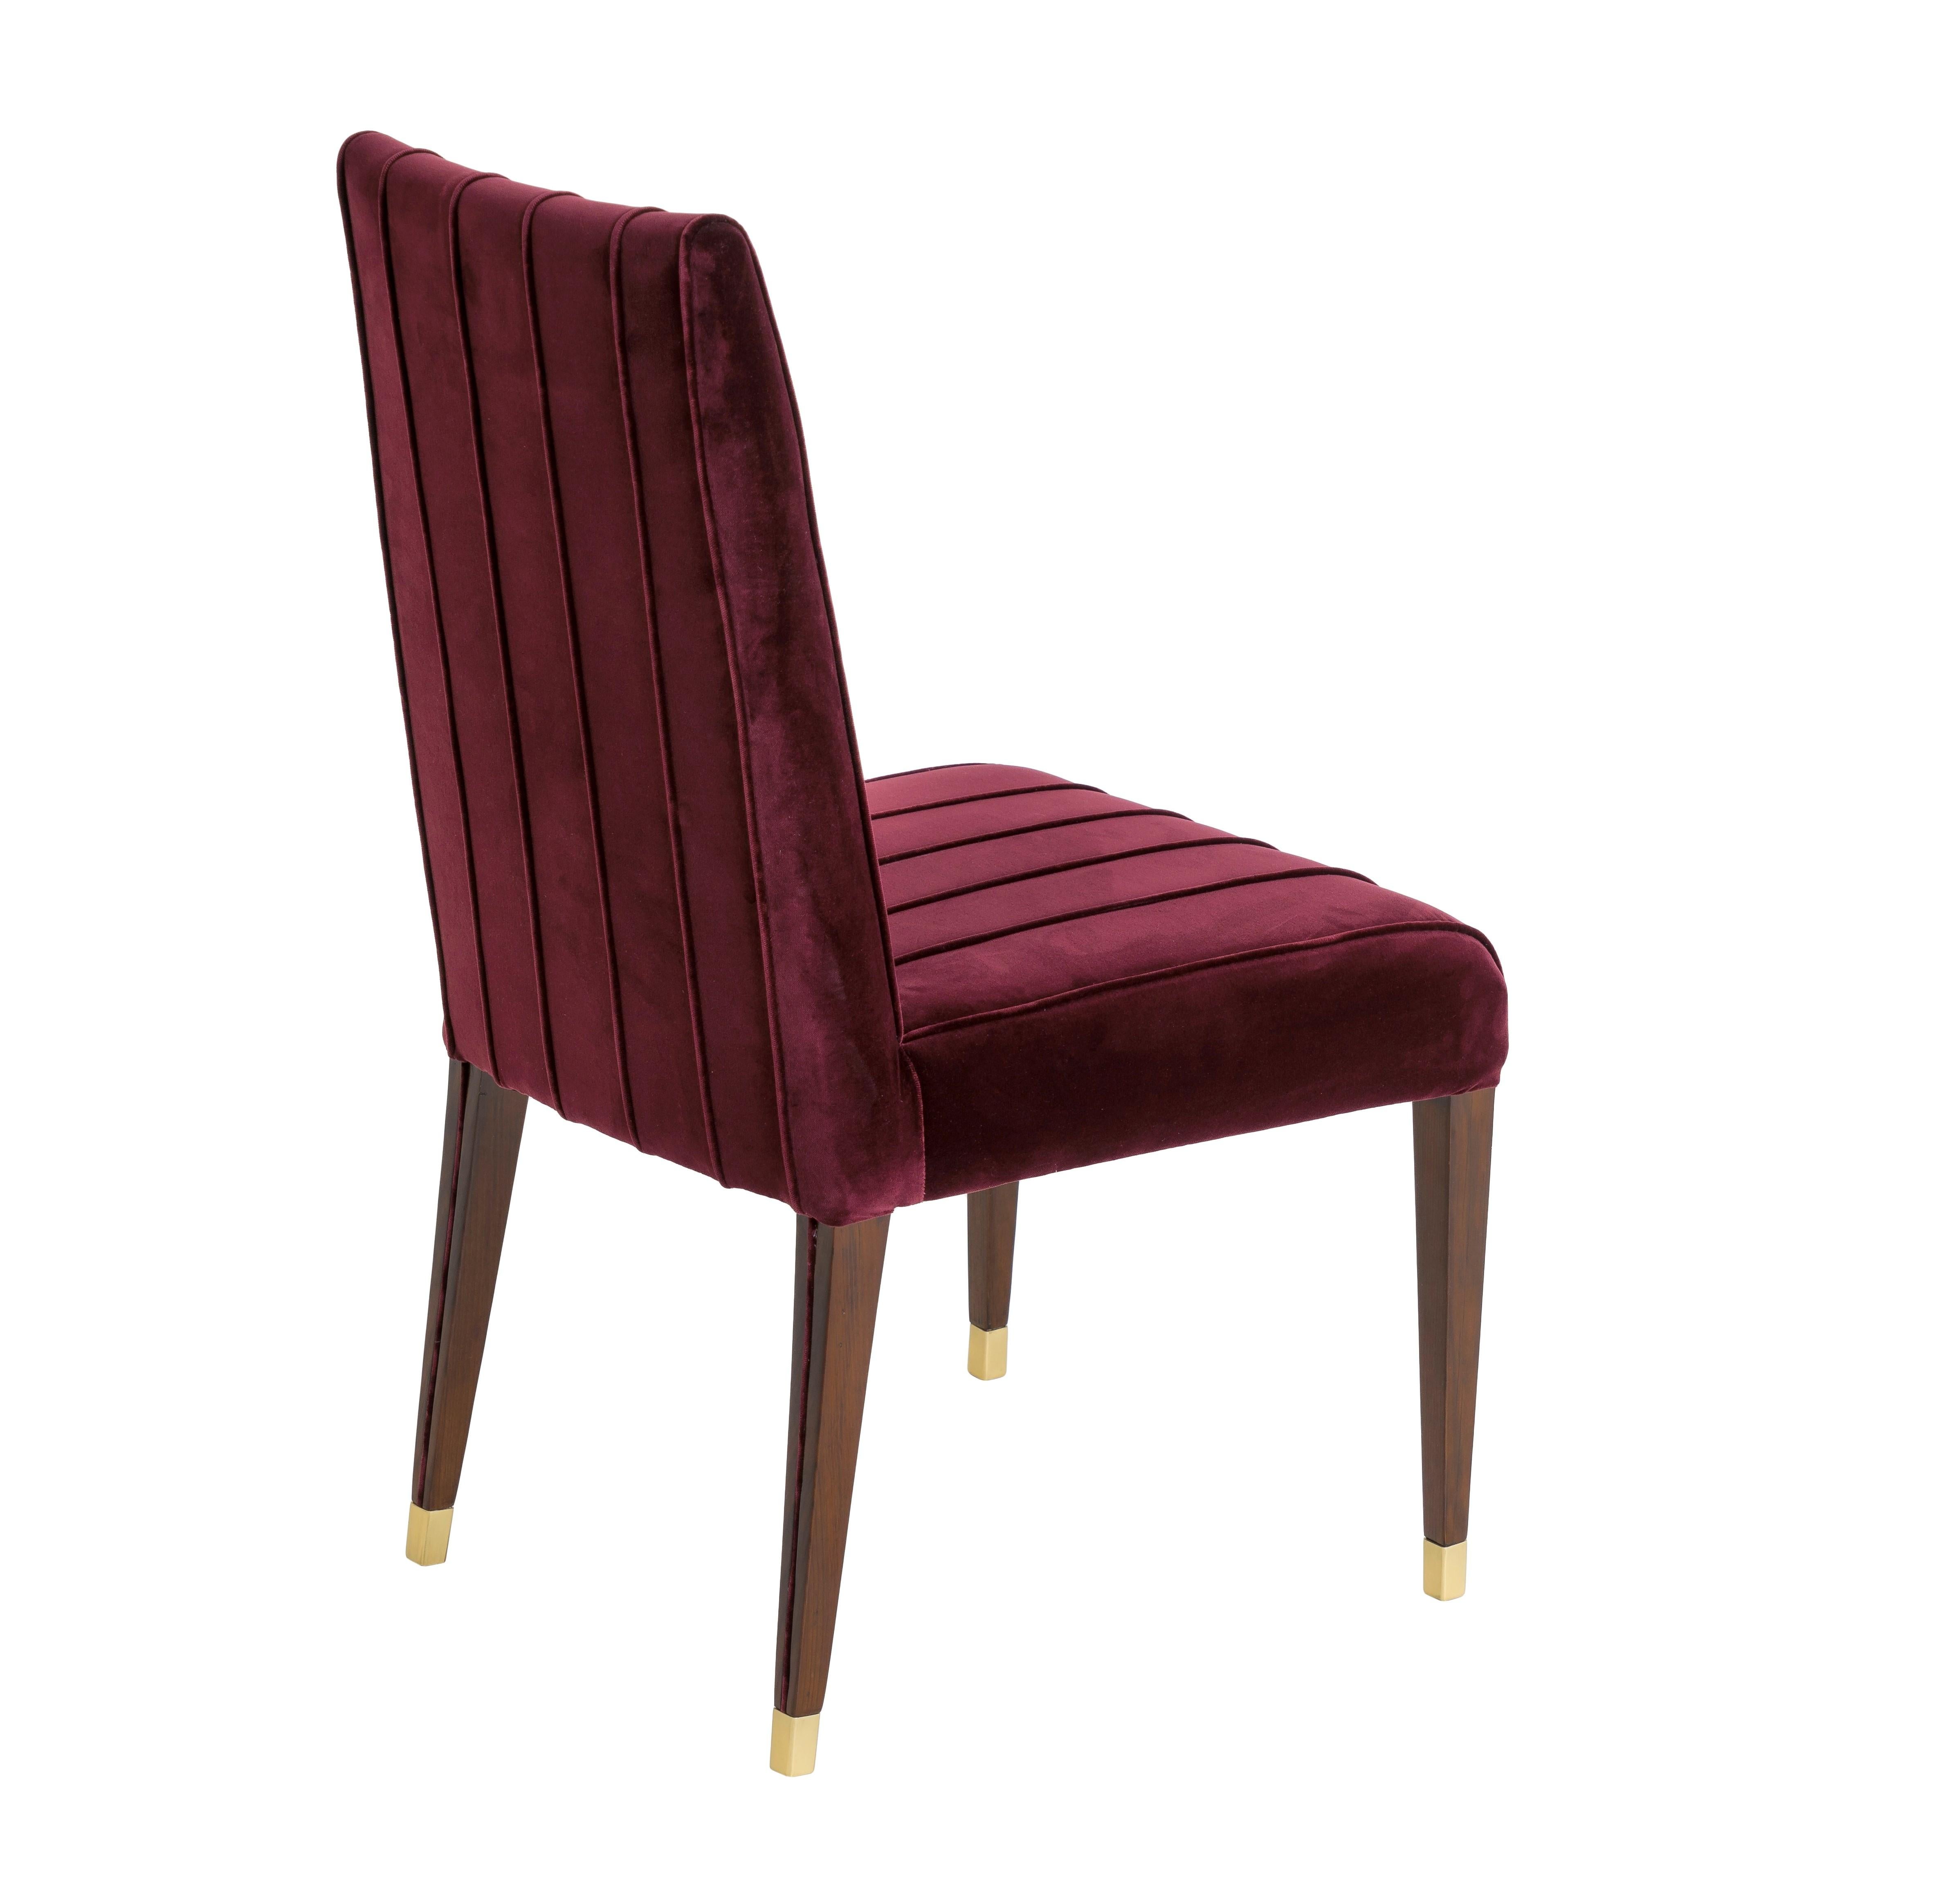 Portuguese GLORIA dining chair with brass tips